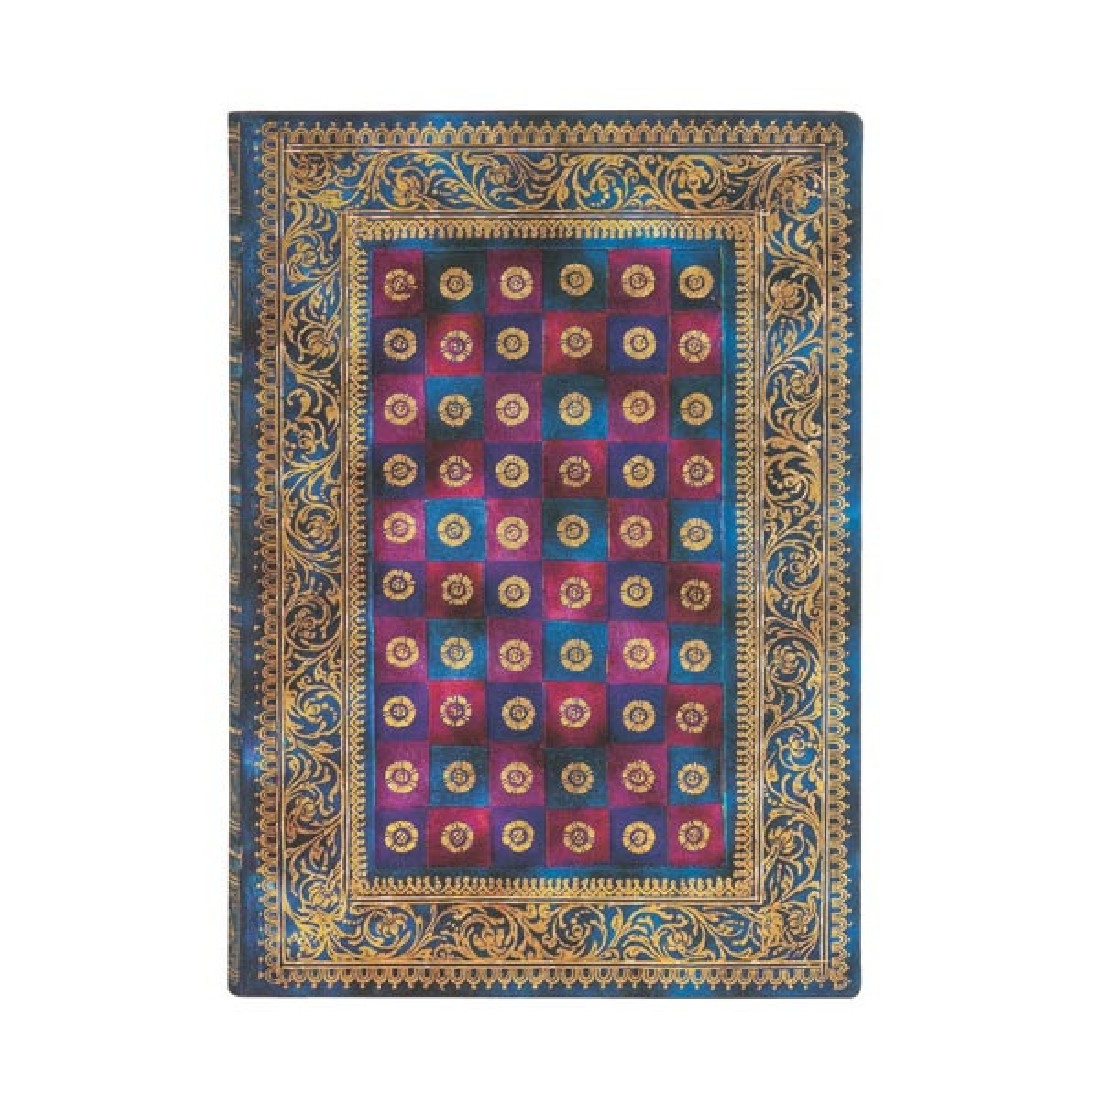 Paperblanks frexible sofrcover notebook, Celeste, Venetian mornings, Midi 13x18cm, Lined, 176 pages, 100gsm